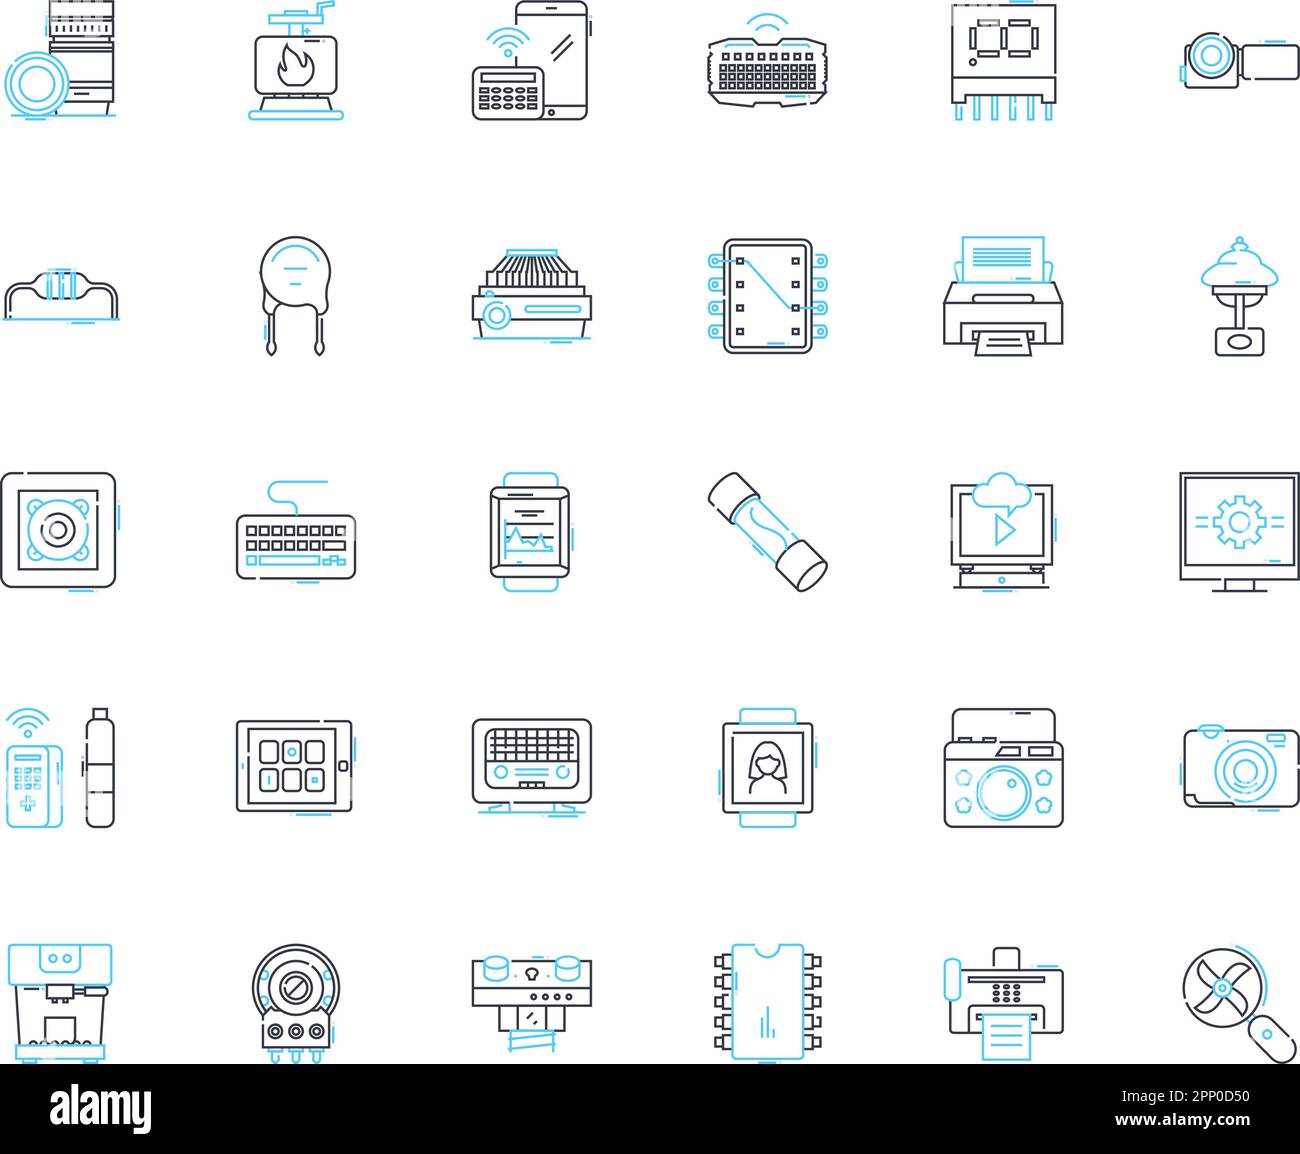 Cybernetic operation linear icons set. Augmentation, Integration, Robotics, Implant, Prosthetic, Enhancement, Interface line vector and concept signs Stock Vector